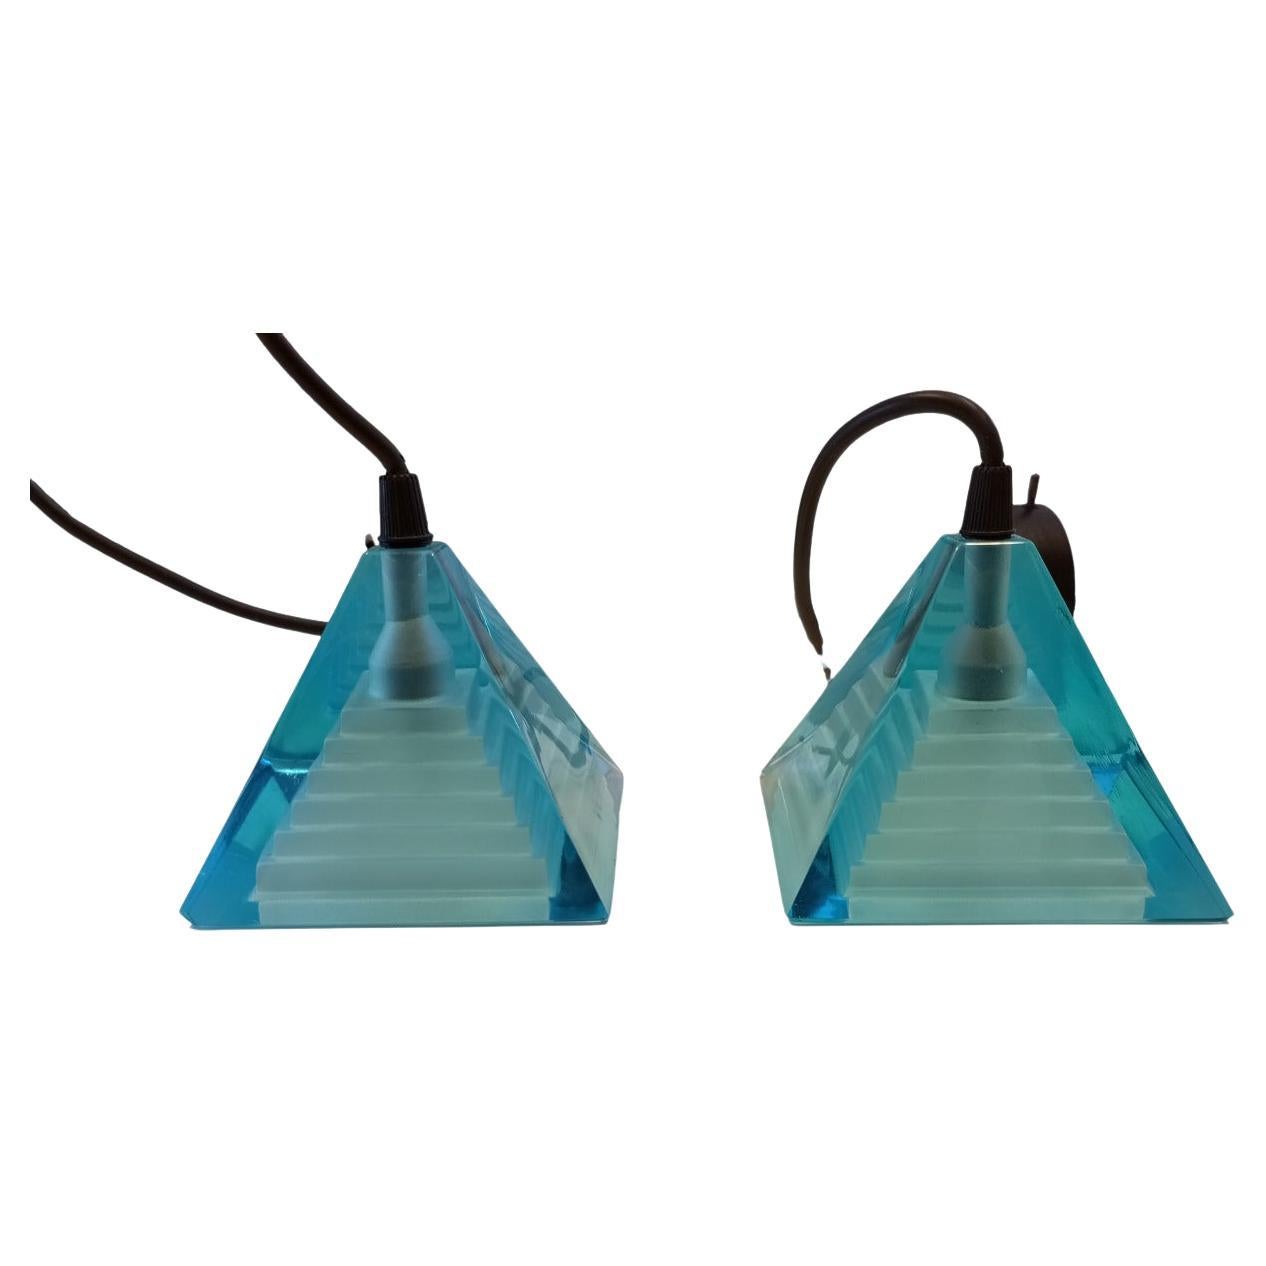 Pair of blue 'Pyramid' lamps designed by Paolo Piva for Mazzega  Murano glass  For Sale